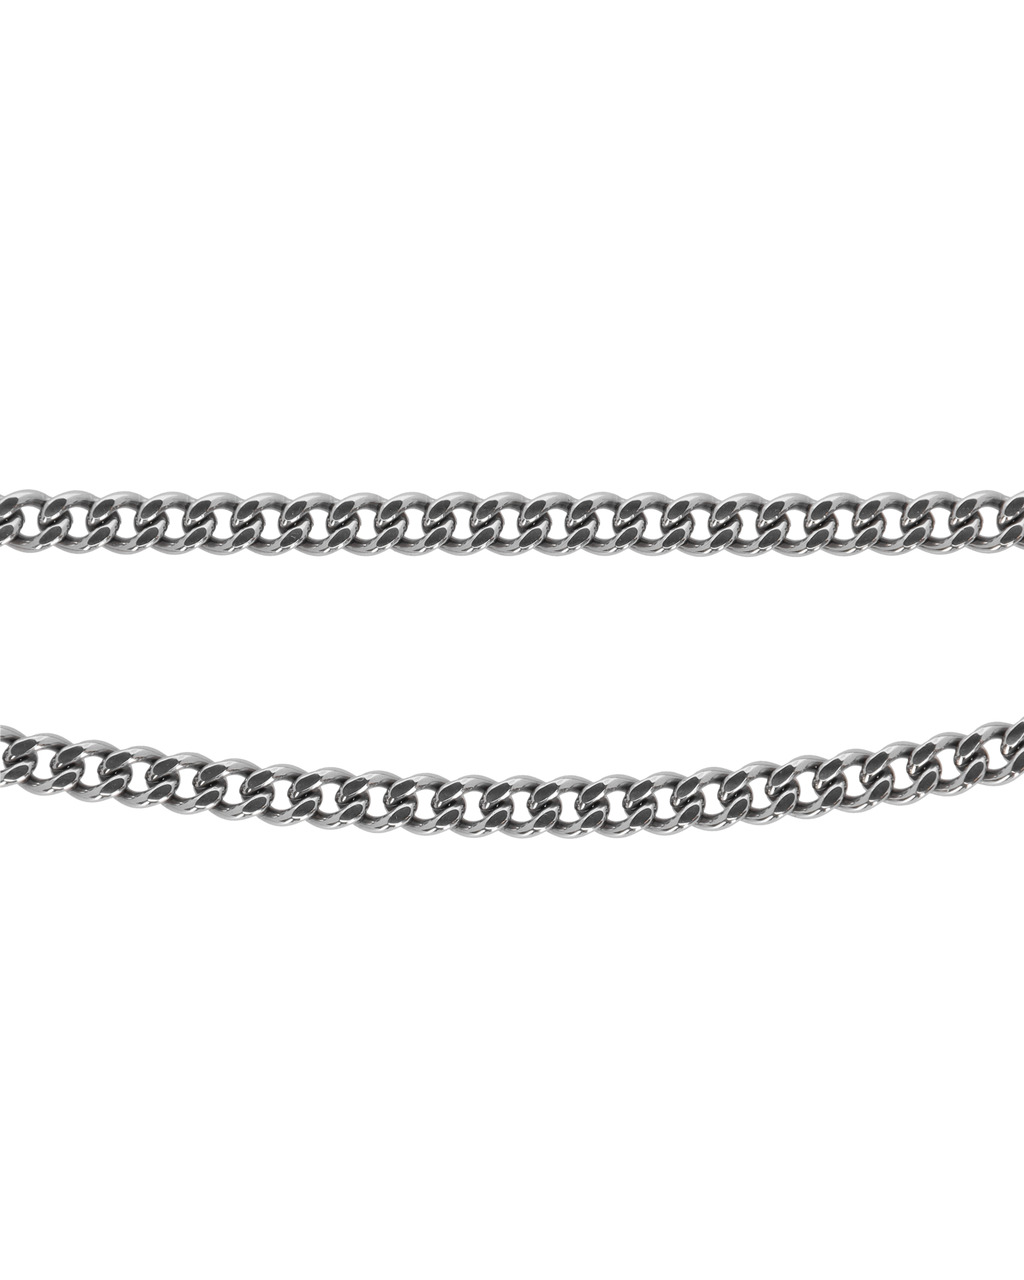 2X CHAIN BUCKLE NECKLACE - 3